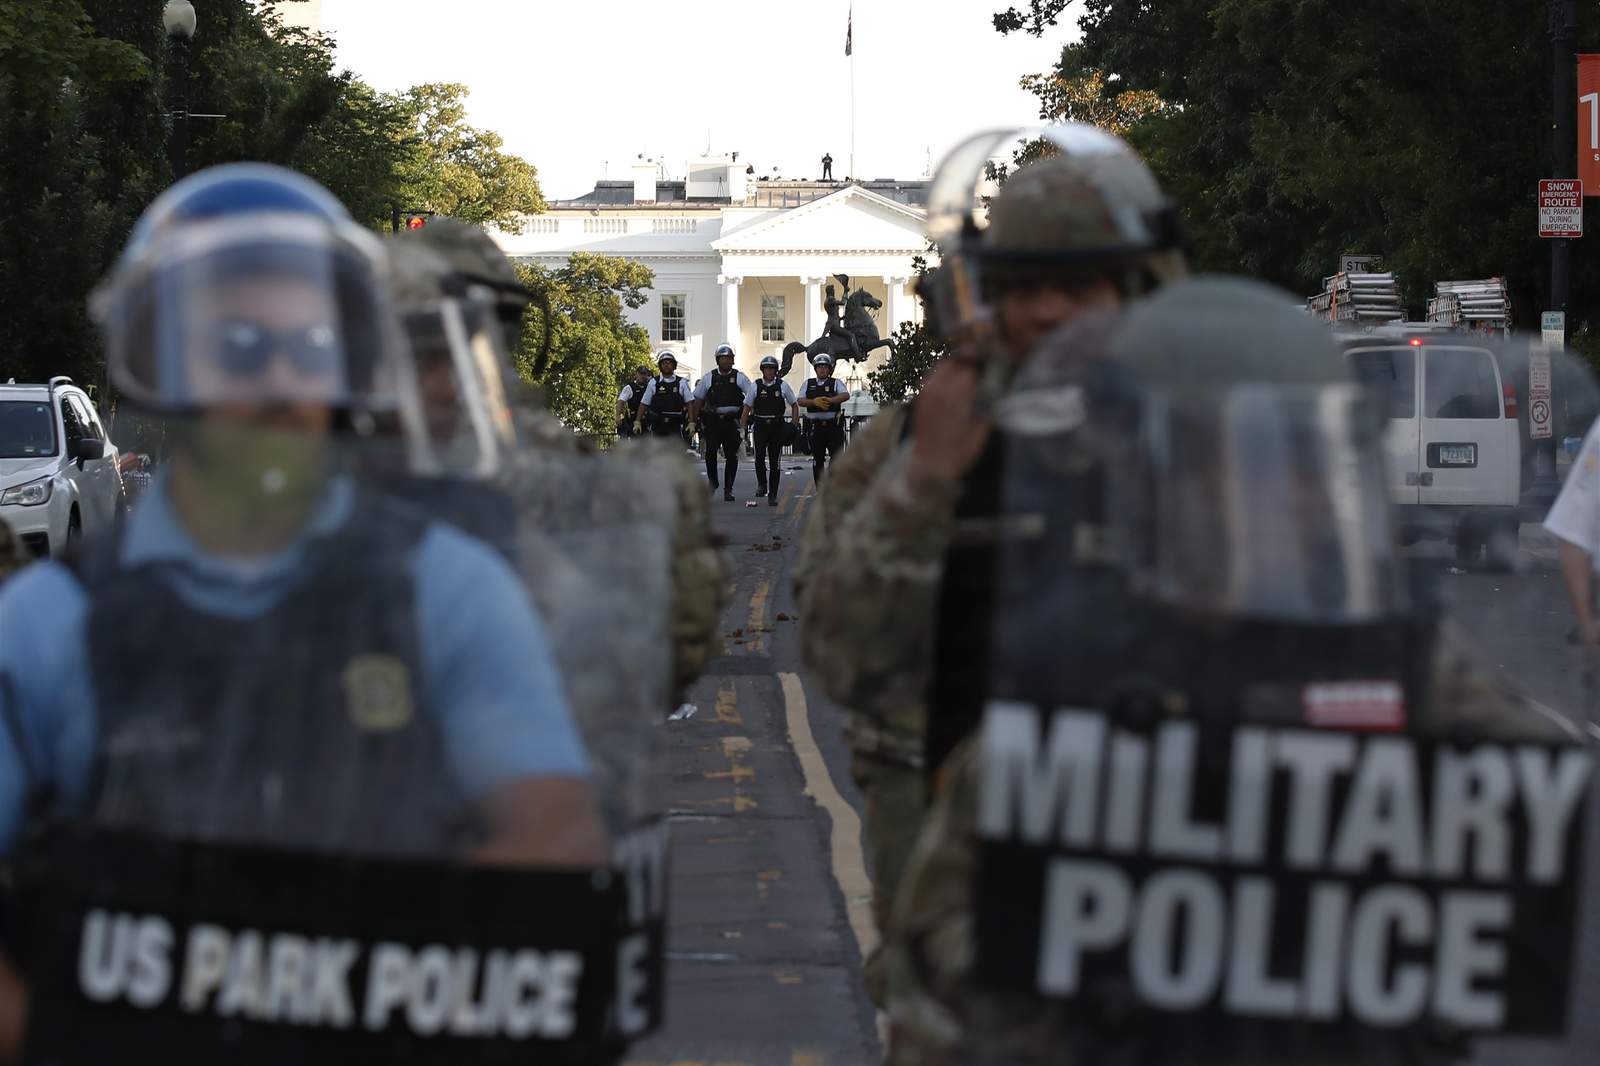 A force trained to safeguard peaceful protests turns on them